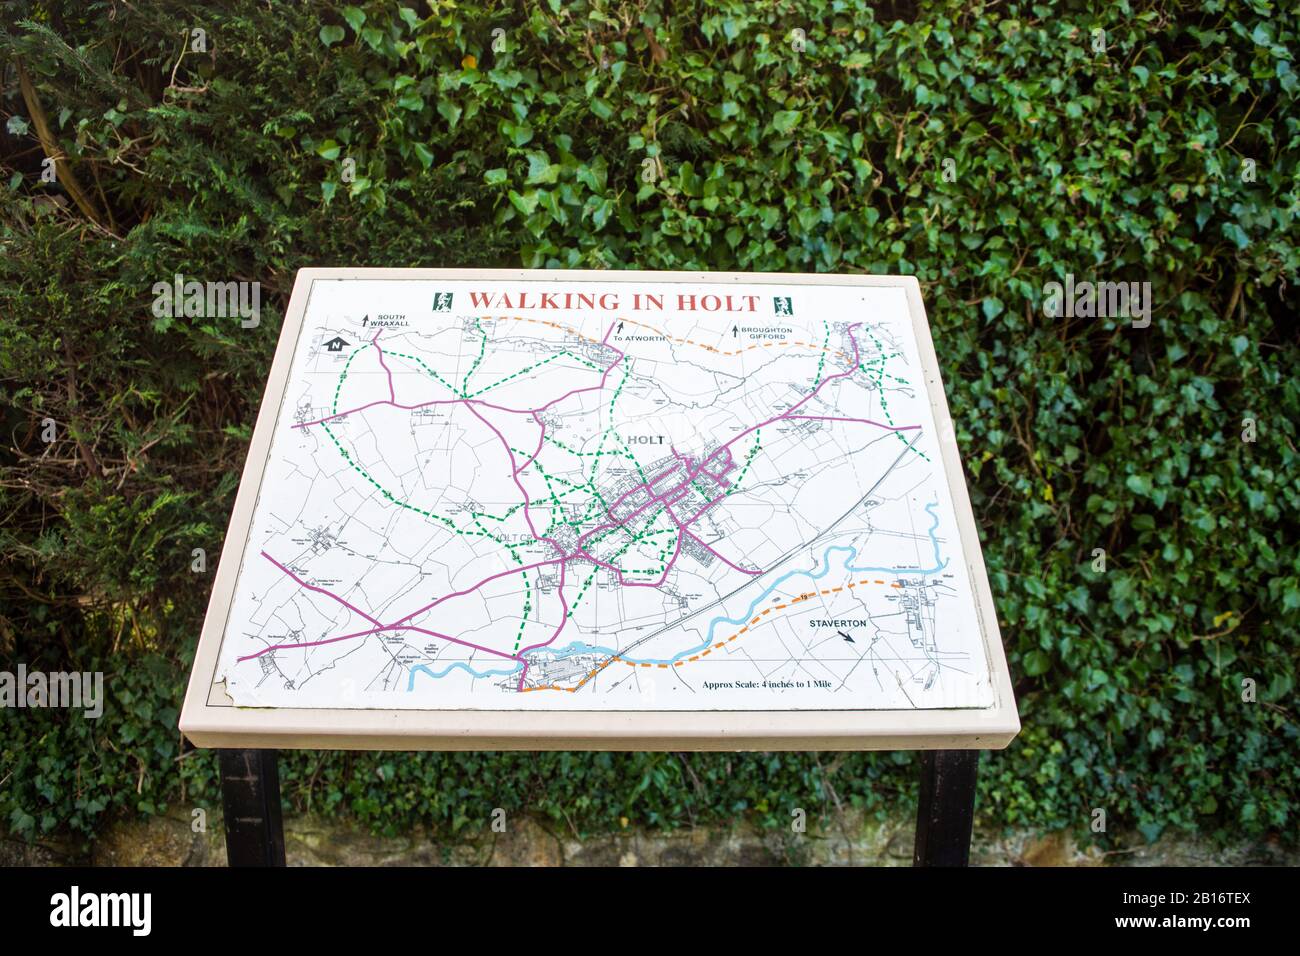 An information board showing a detailed map of the area titled 'Walking in Holt' showing walks through and around the village of Holt in Wiltshire Stock Photo